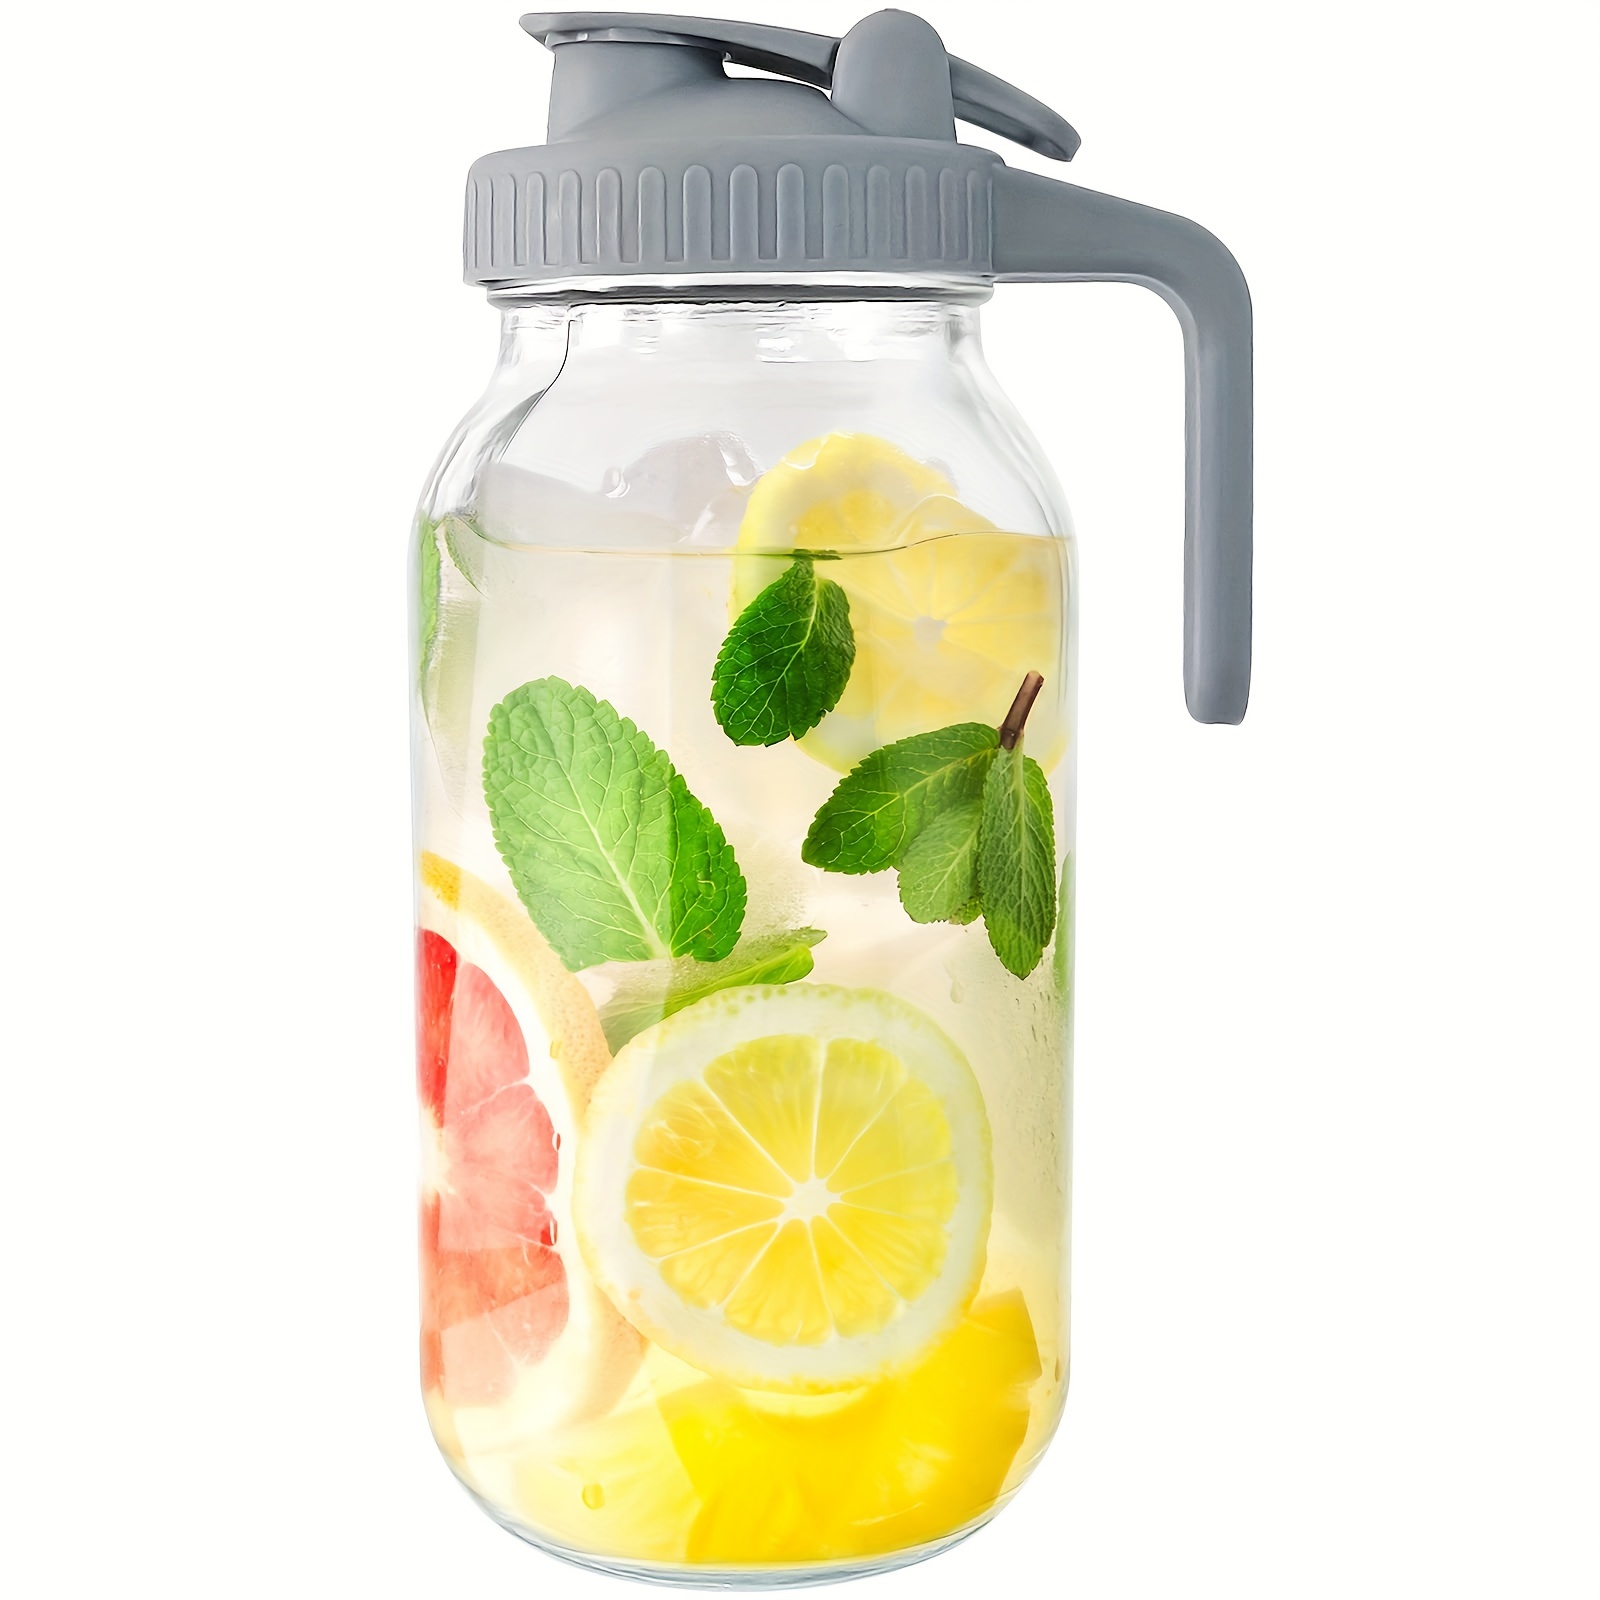 Mason Jar Fruit Infuser Water Pitcher, Glass Pitcher with Filter Lid, Wide  Mouth Jar Leak-proof Water Pitcher, Heavy Duty Glass Jar - 2 Quart